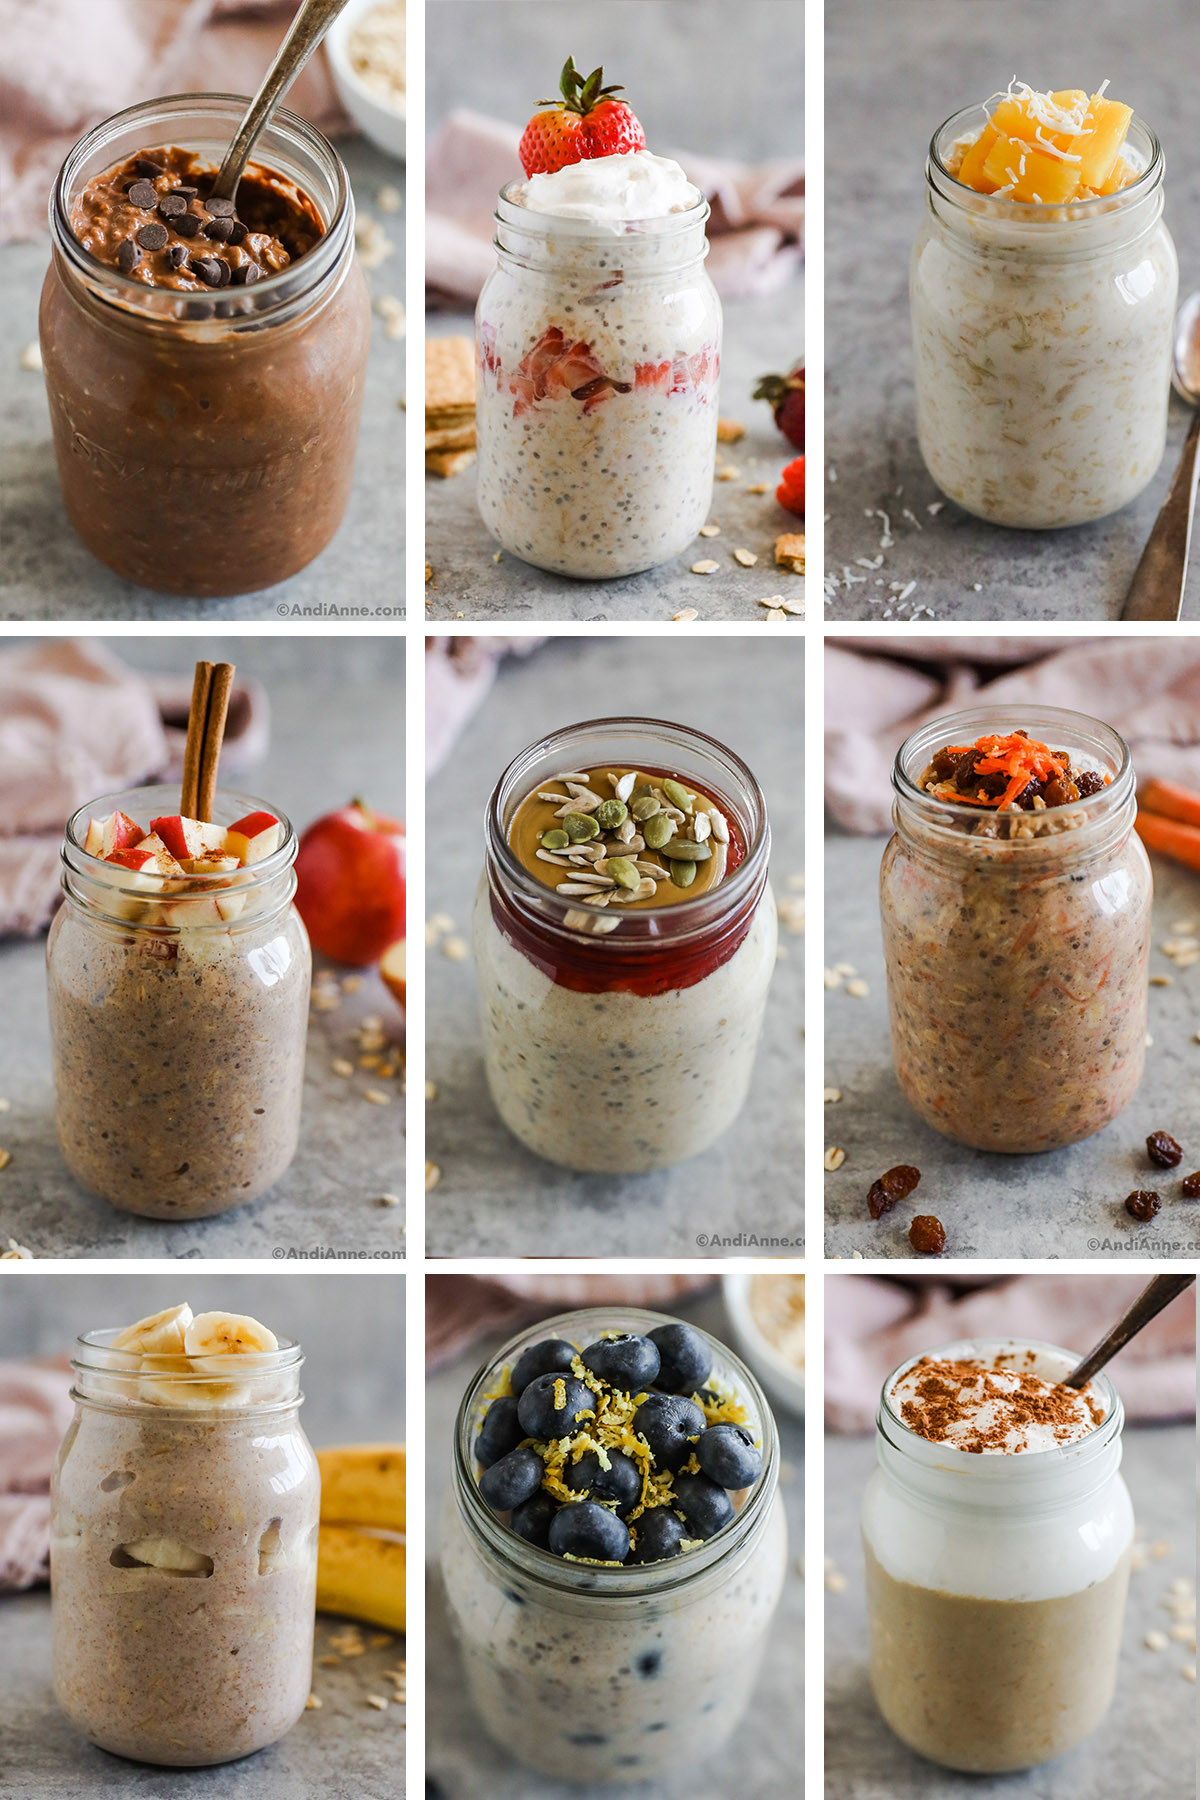 Nine different images of overnight oats in various flavors, all in mason jars.